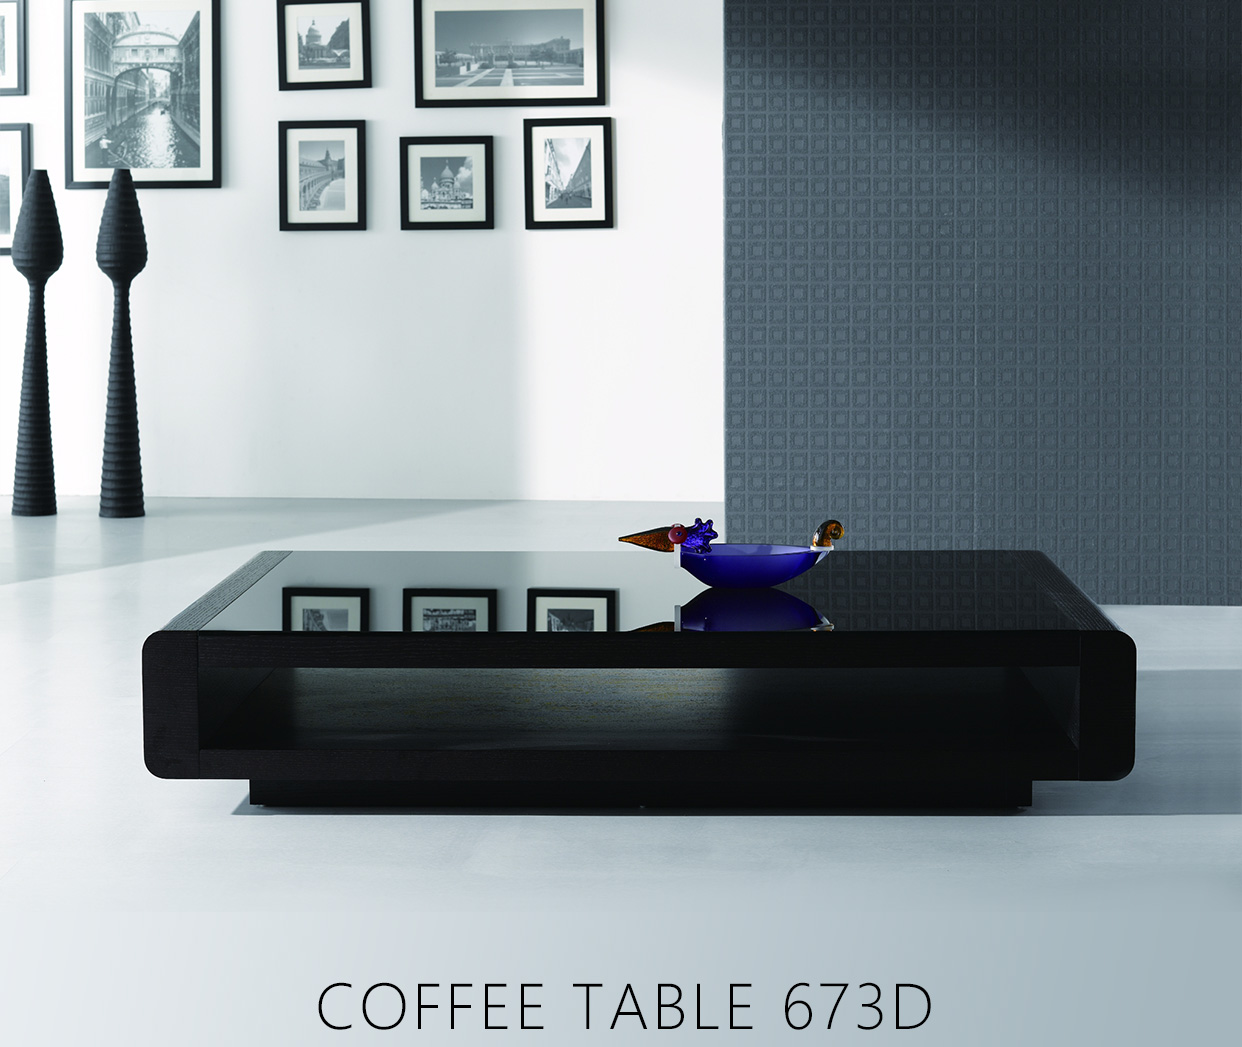 COFFEE TABLE 673D